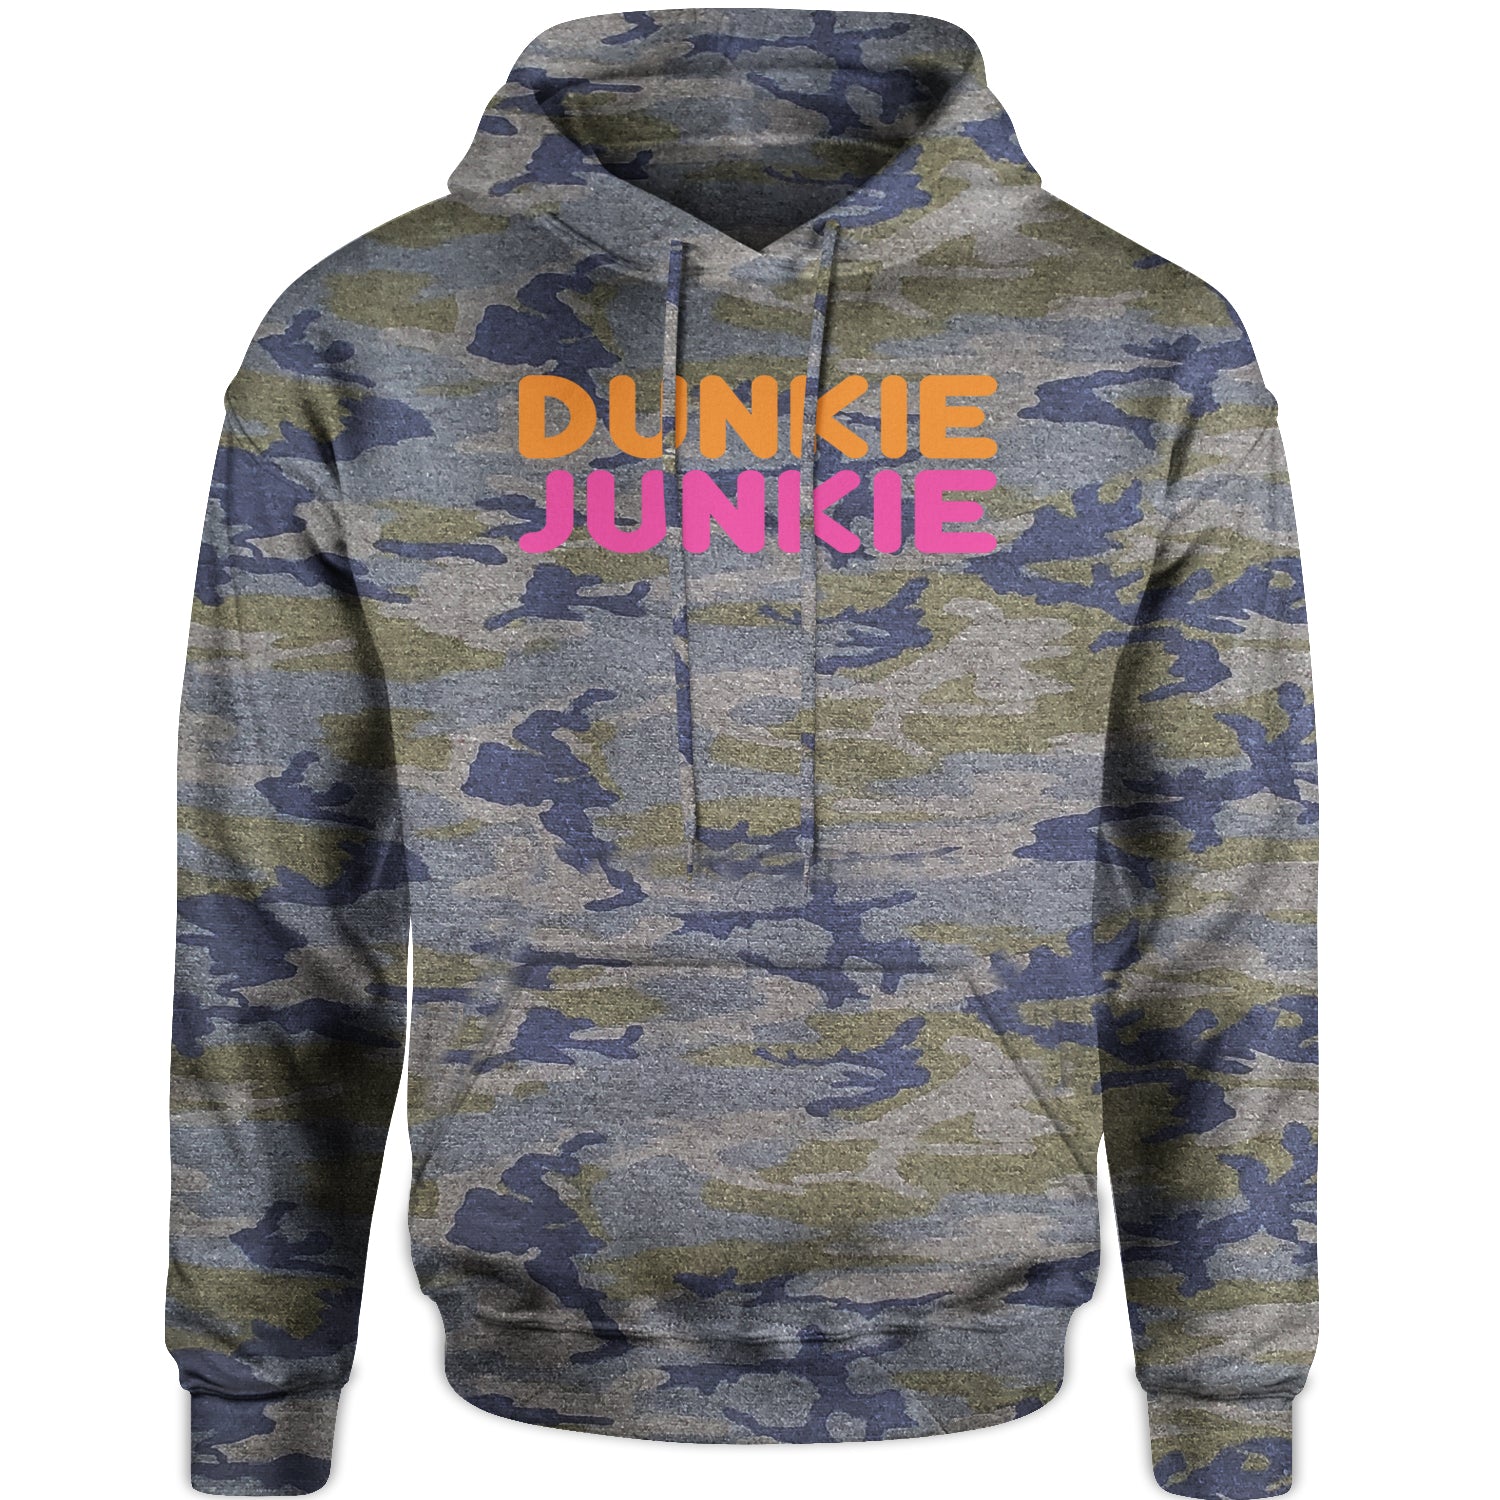 Dunkie Junkie Adult Hoodie Sweatshirt addict, capuccino, coffee, dd, dnkn, dunkin, dunking, latte by Expression Tees